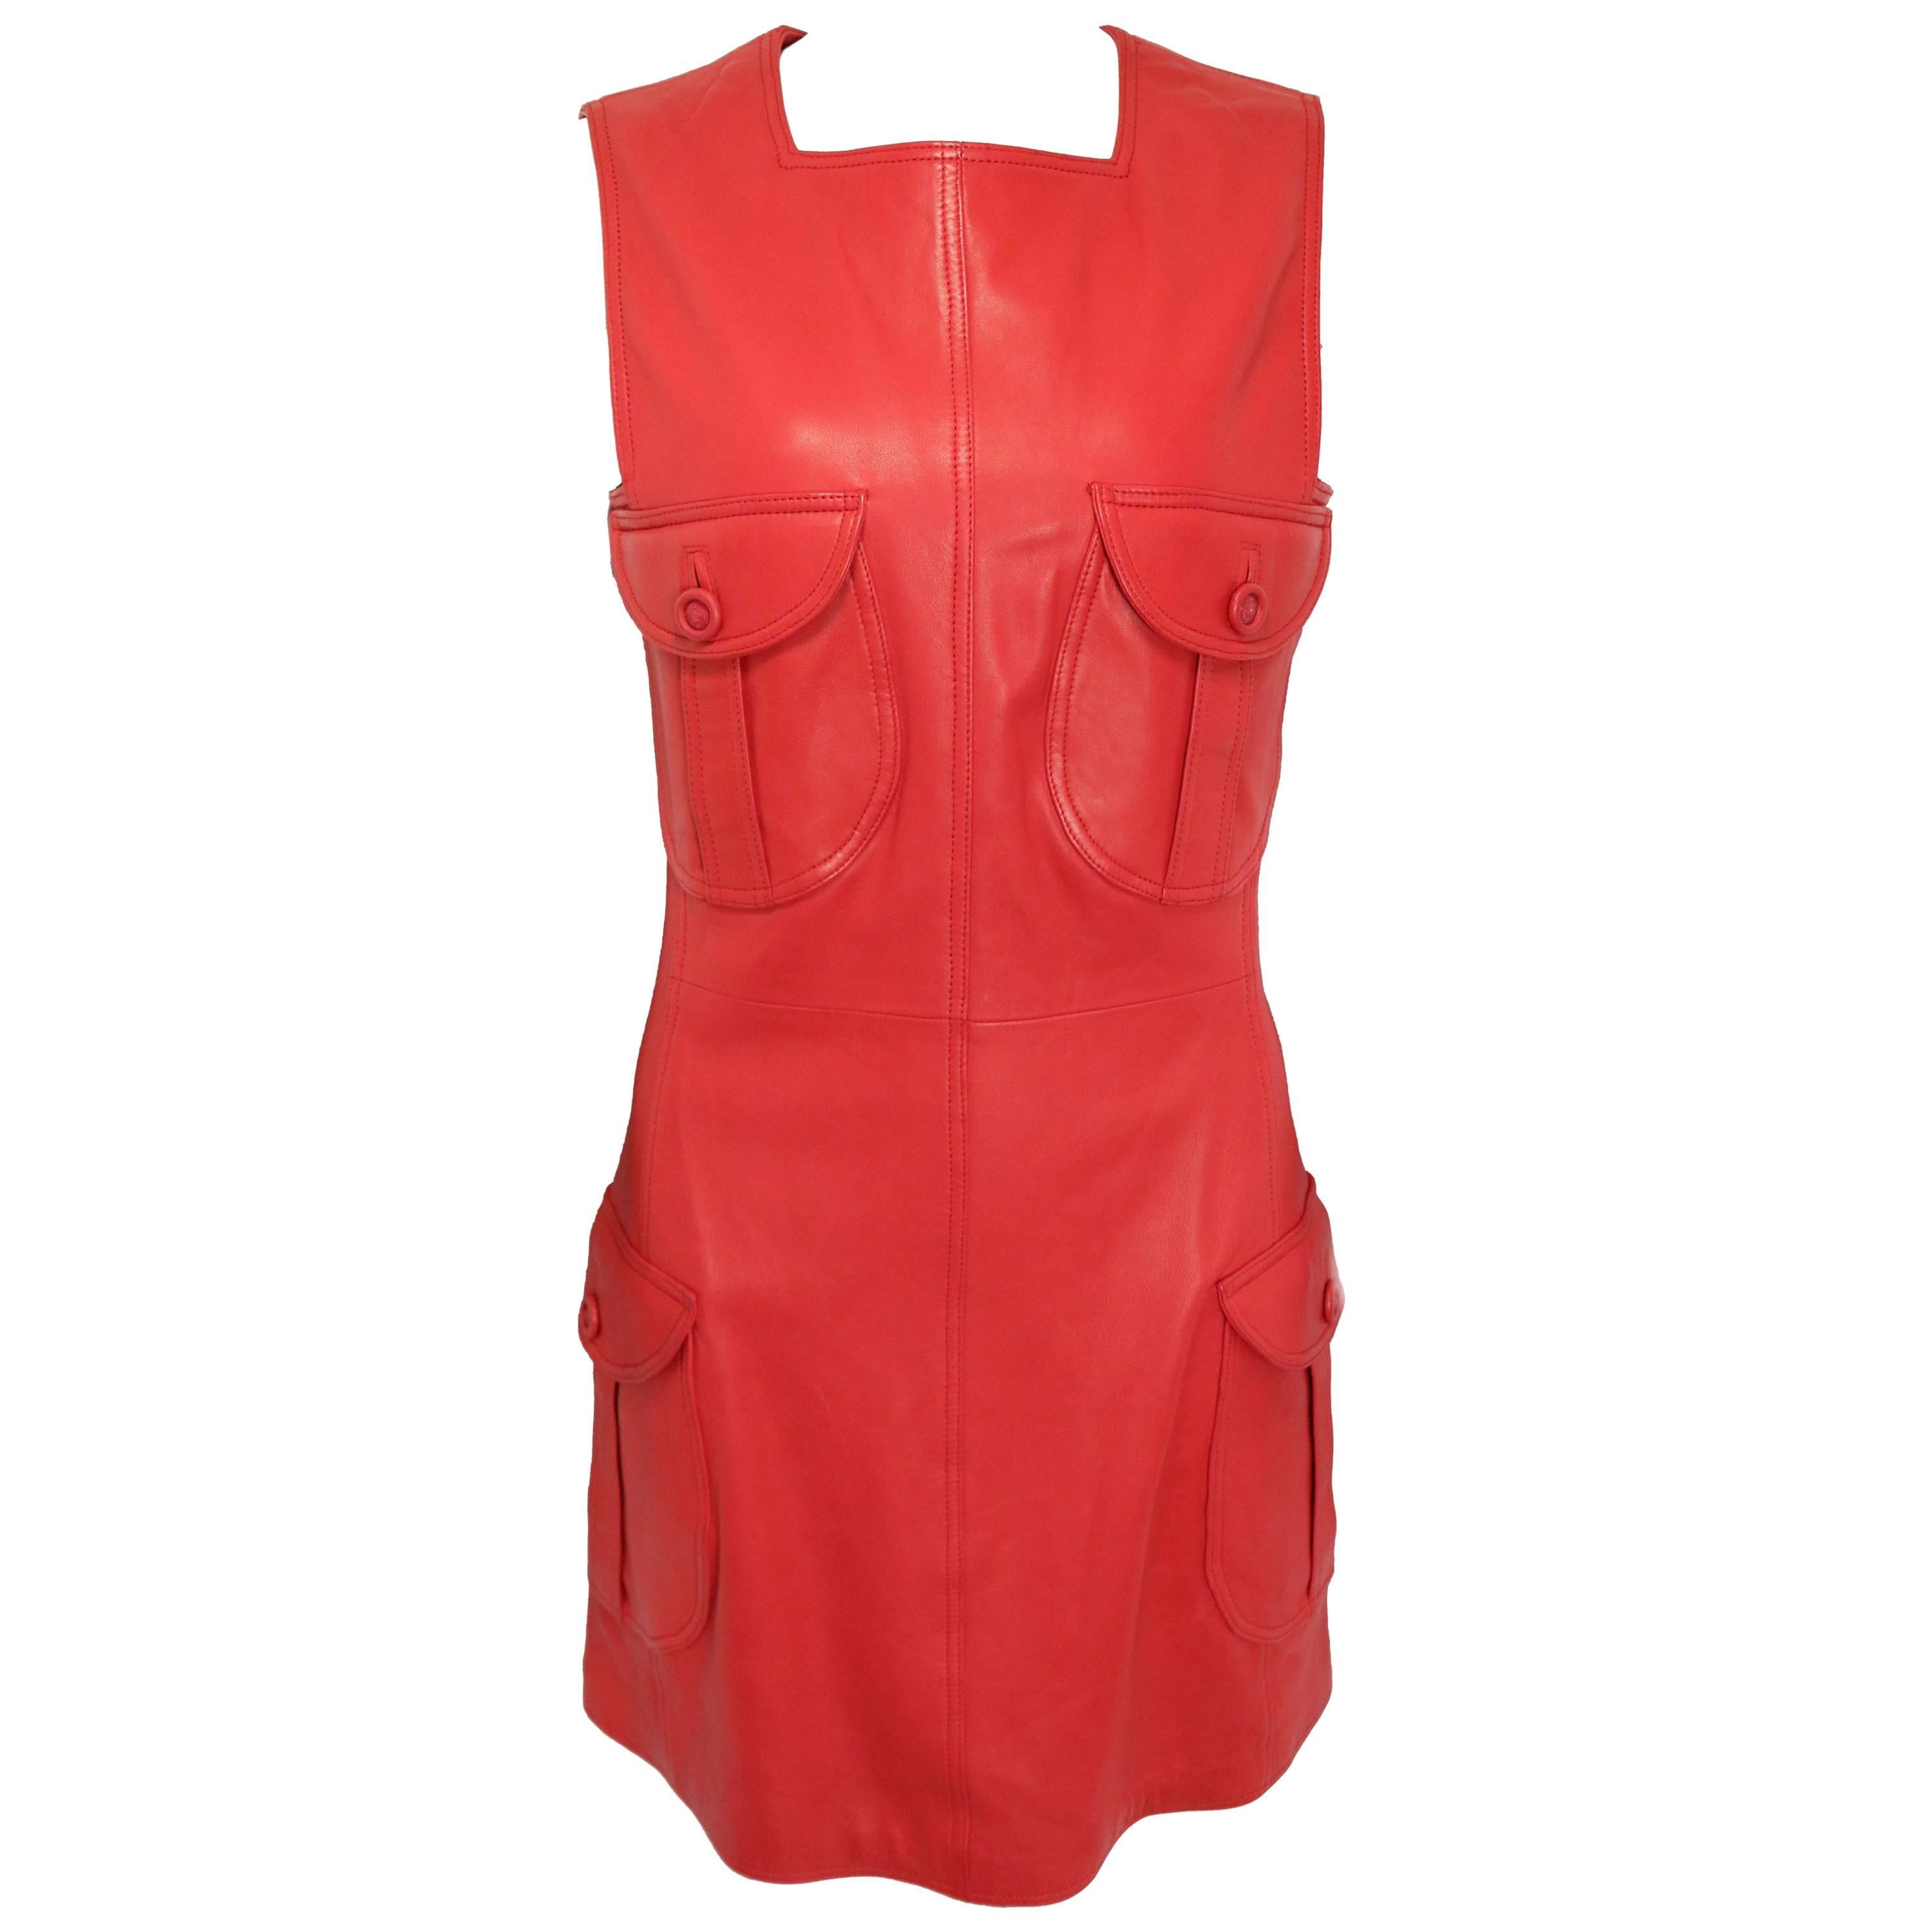 Iconic 90s Gianni Versace Red Leather Dress  For Sale